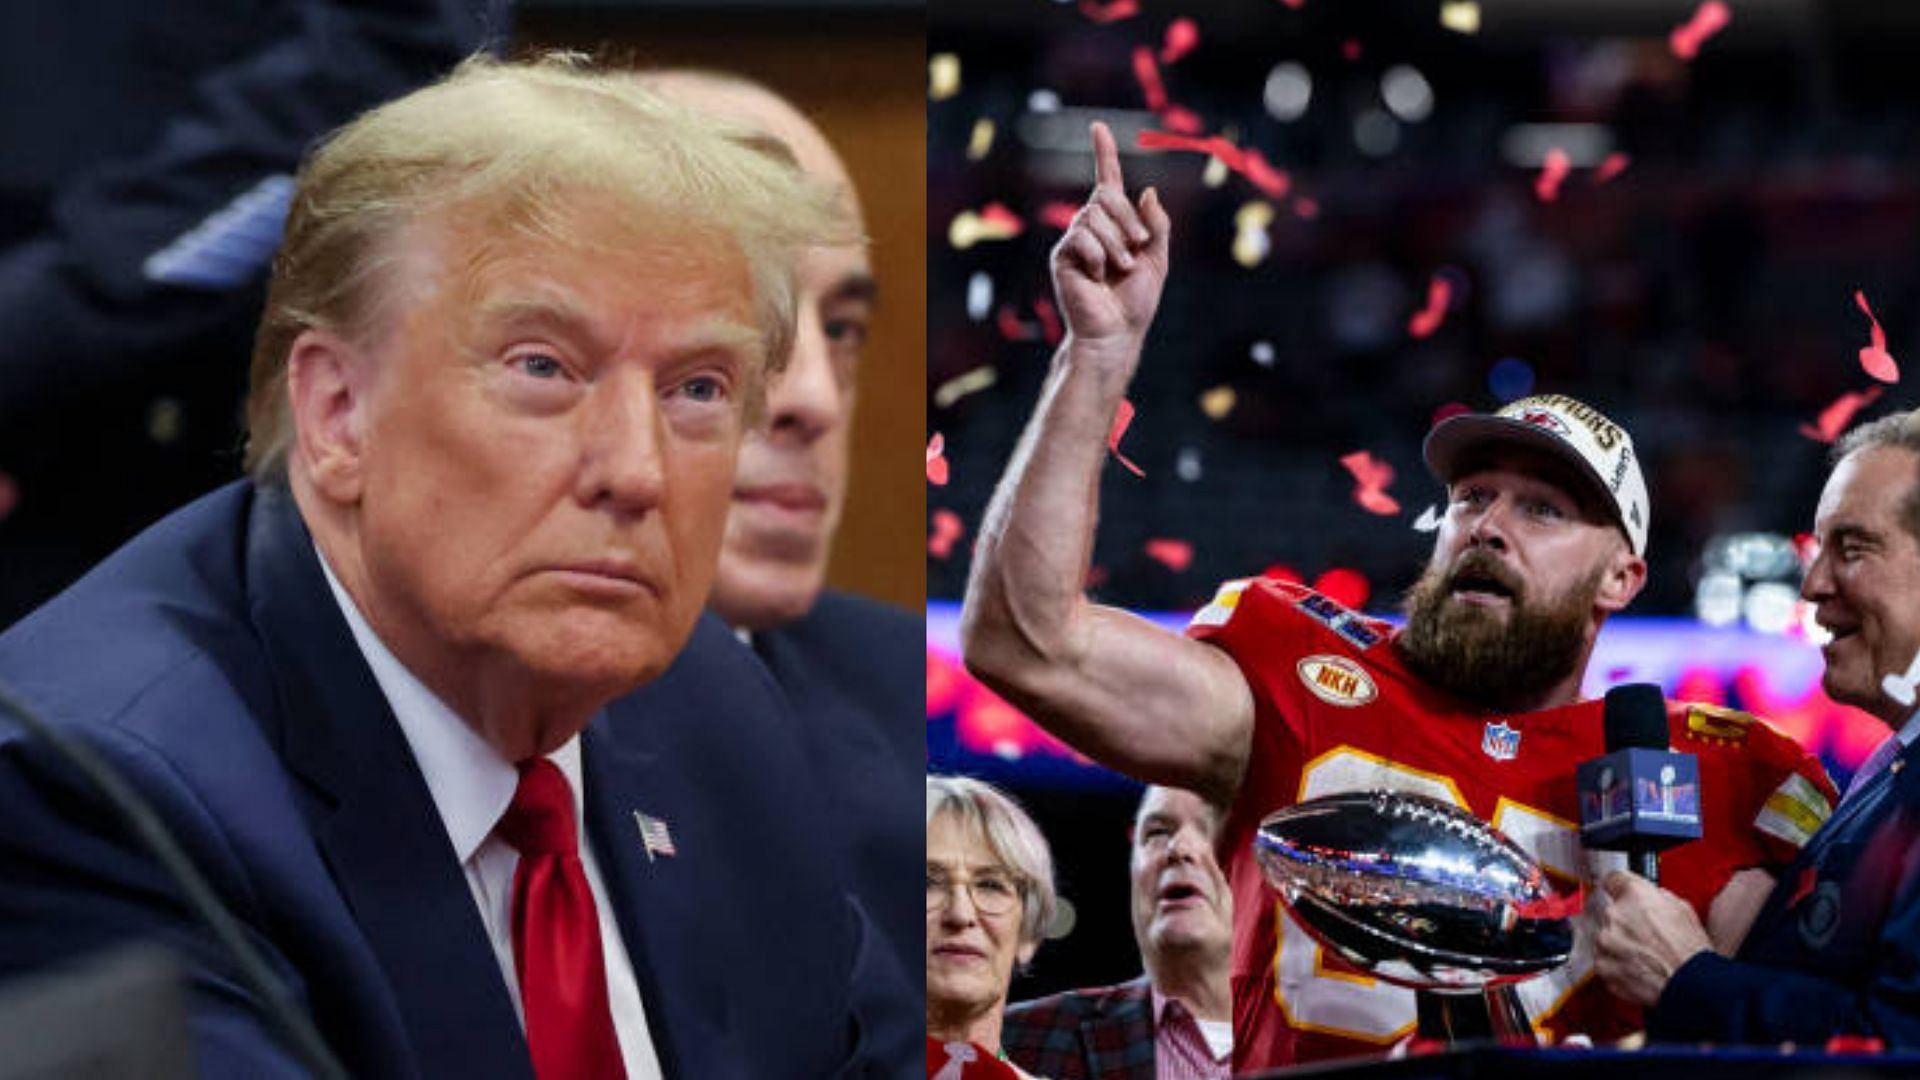 Did Travis Kelce express his feelings over former President Donald Trump?